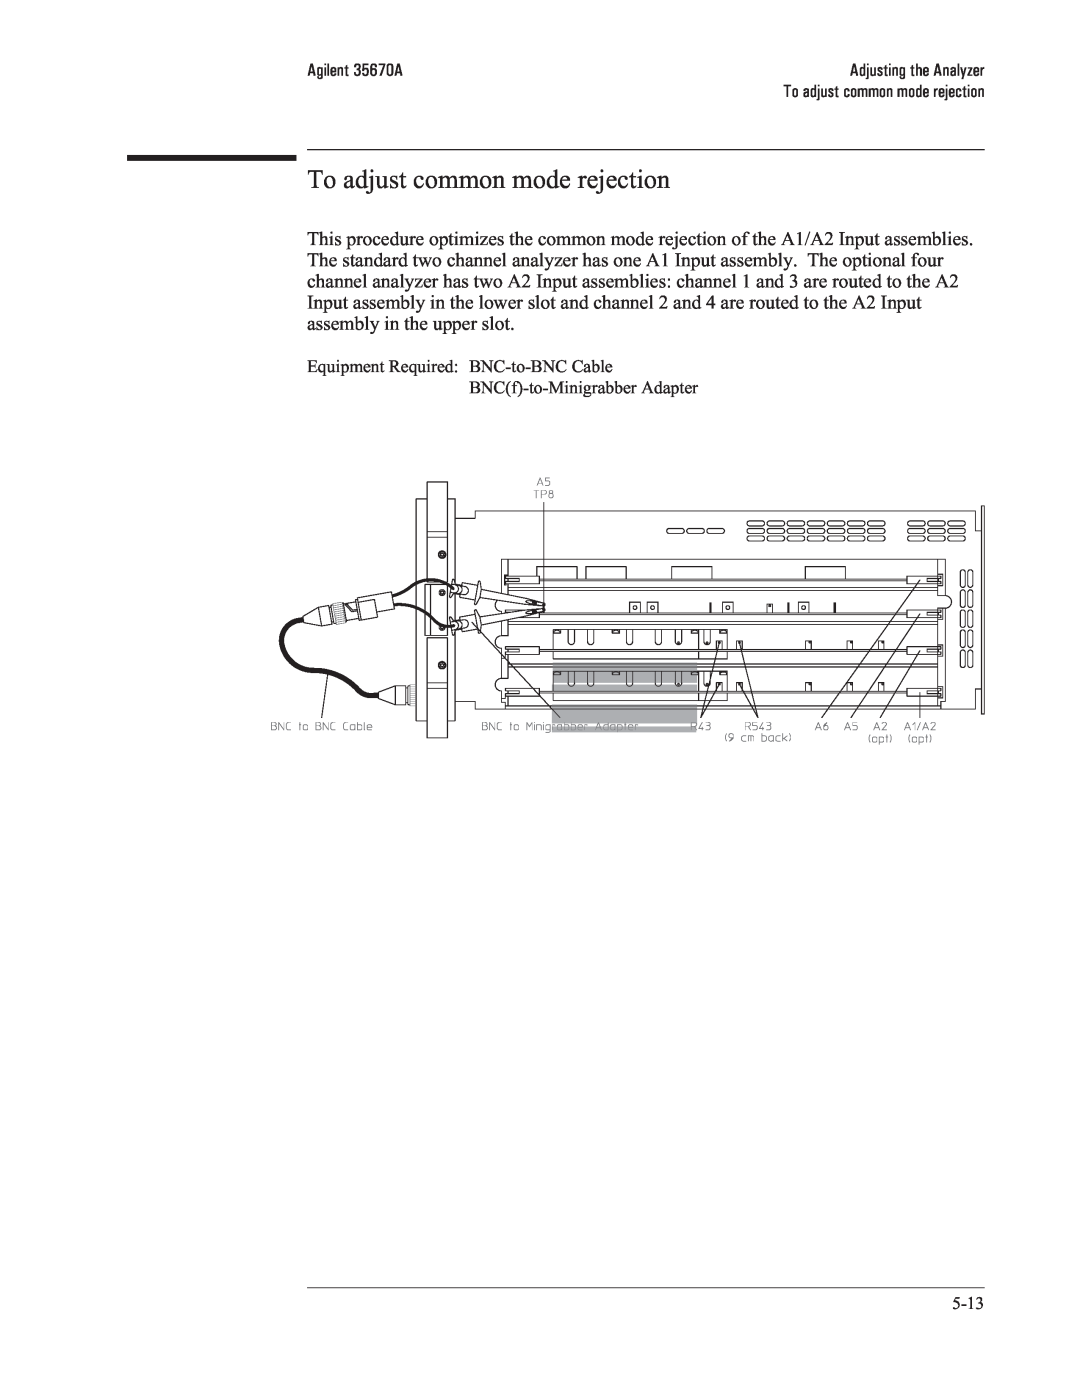 Agilent Technologies 35670-90066 manual To adjust common mode rejection, Equipment Required: BNC-to-BNCCable 